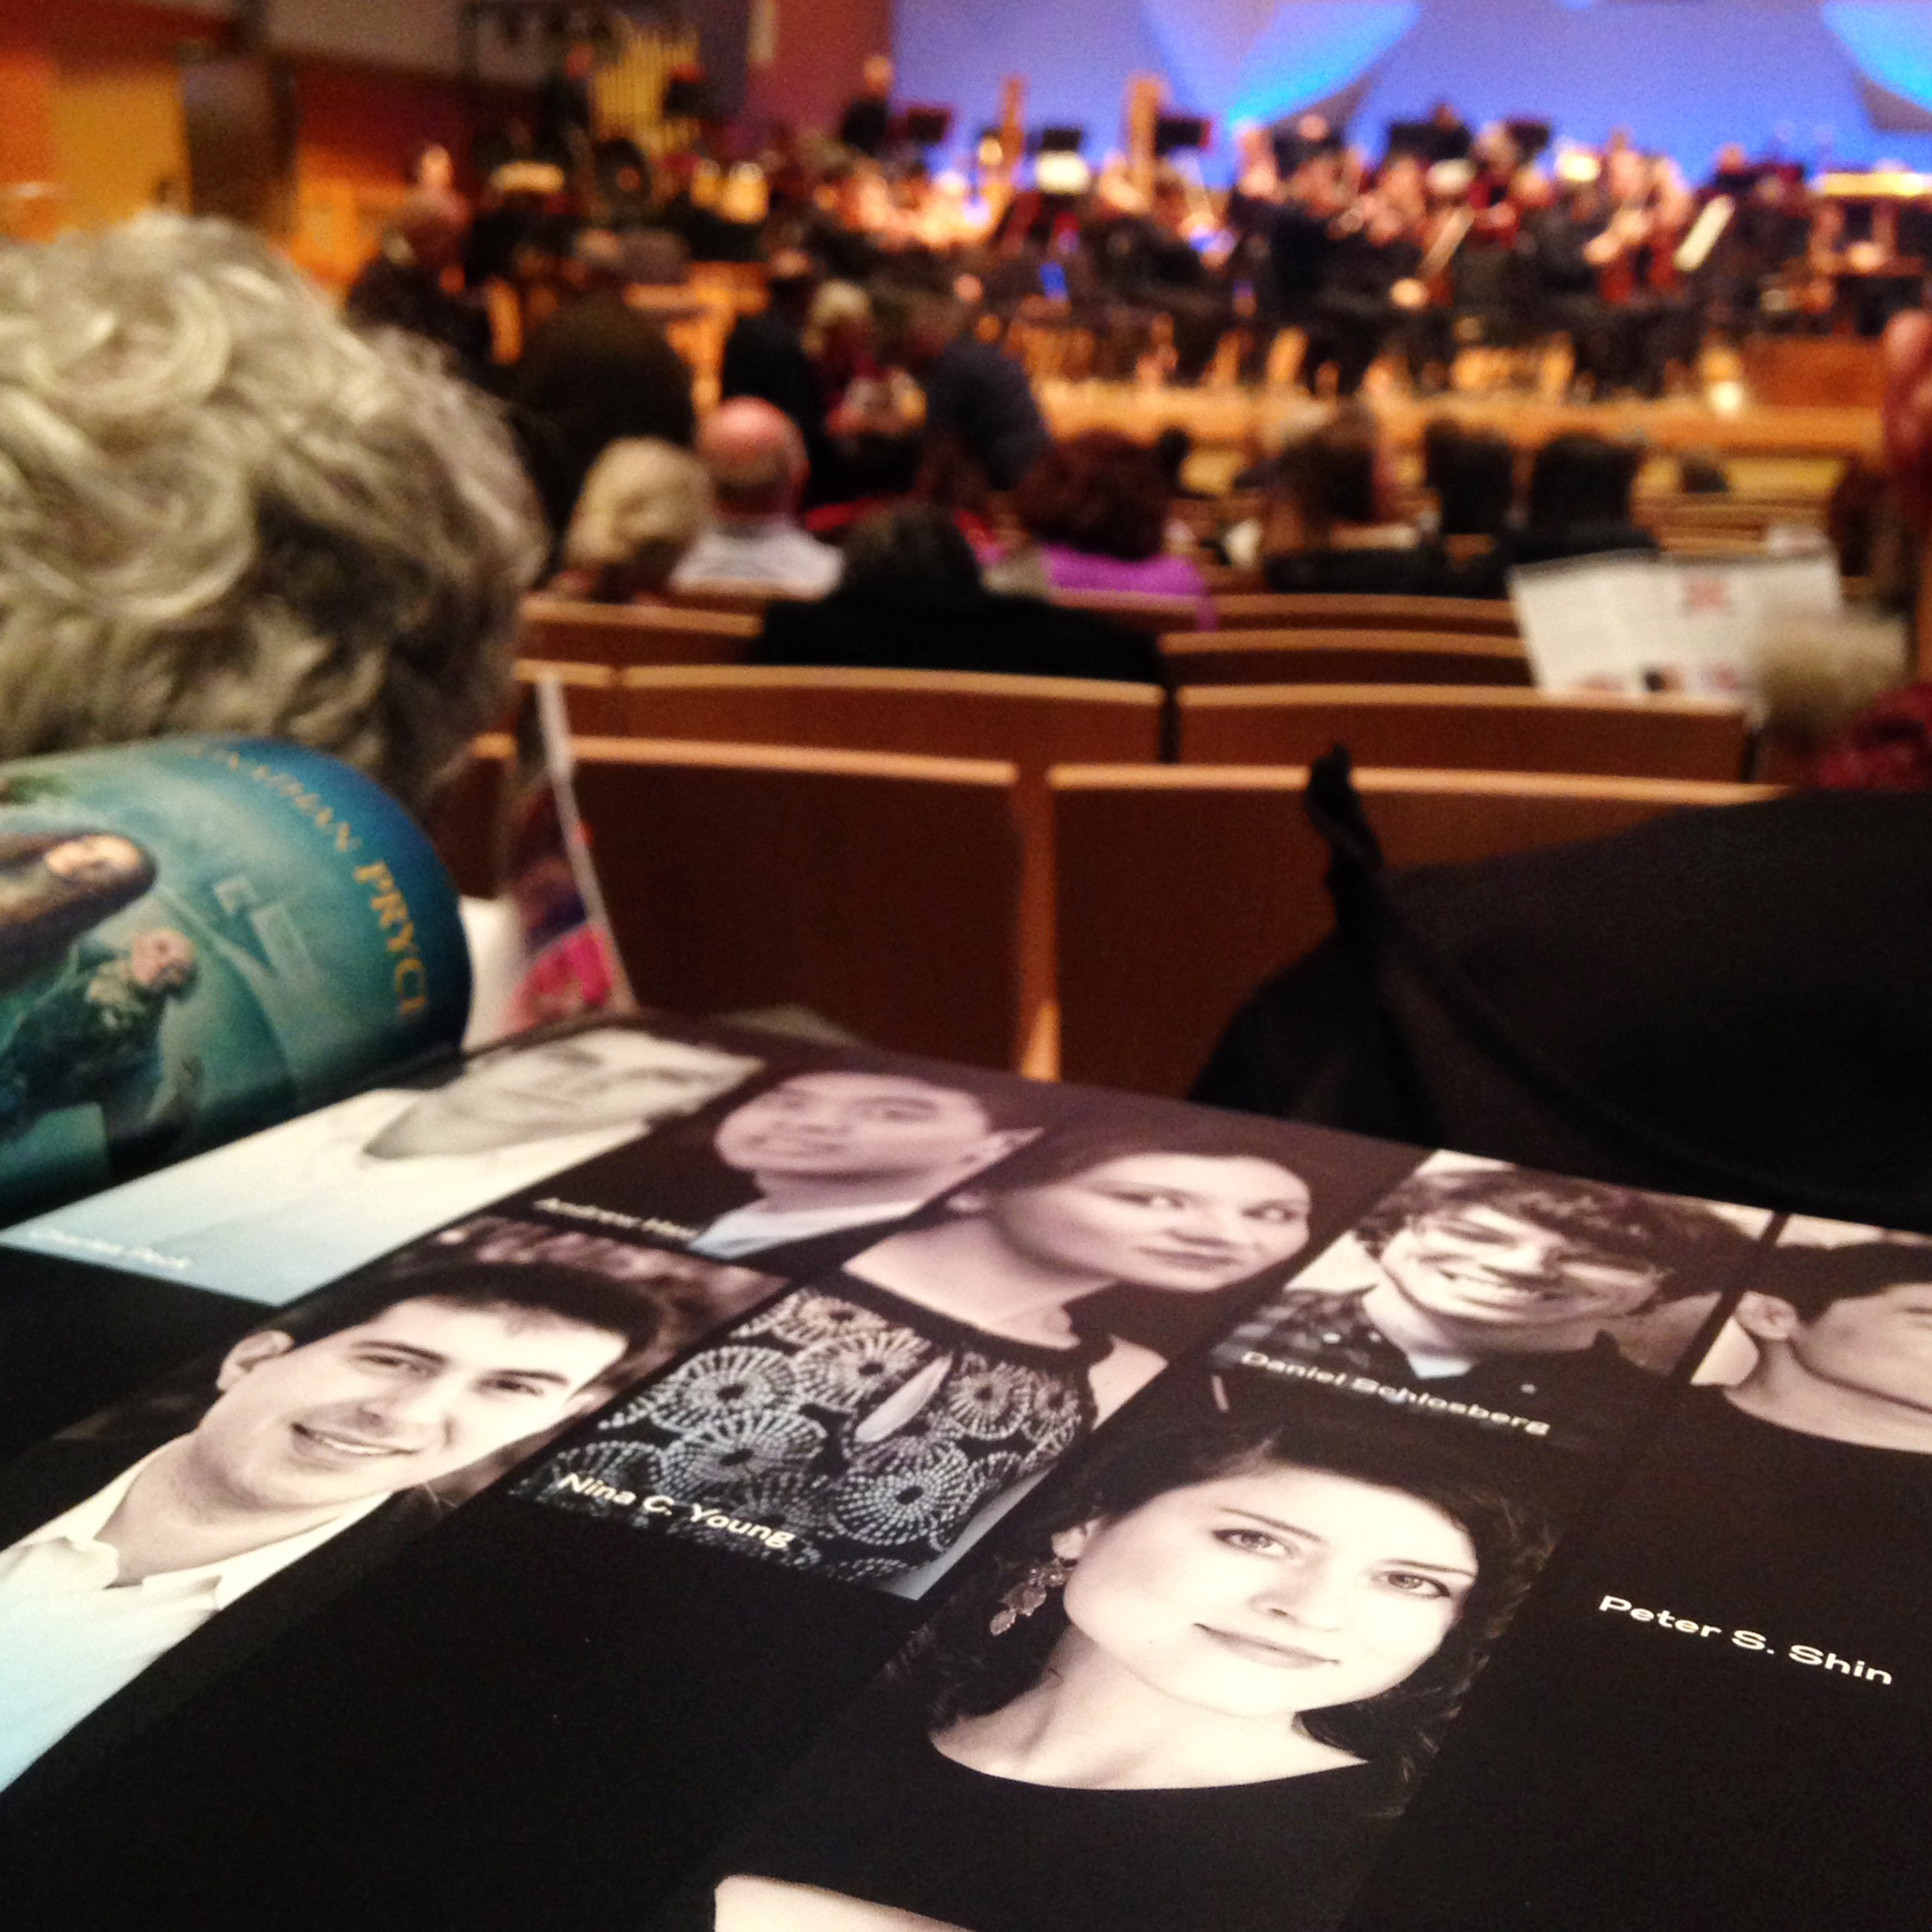 An open program for the Minnesota Orchestra Composer Institute showing photos of the seven composers featured in November 2017.